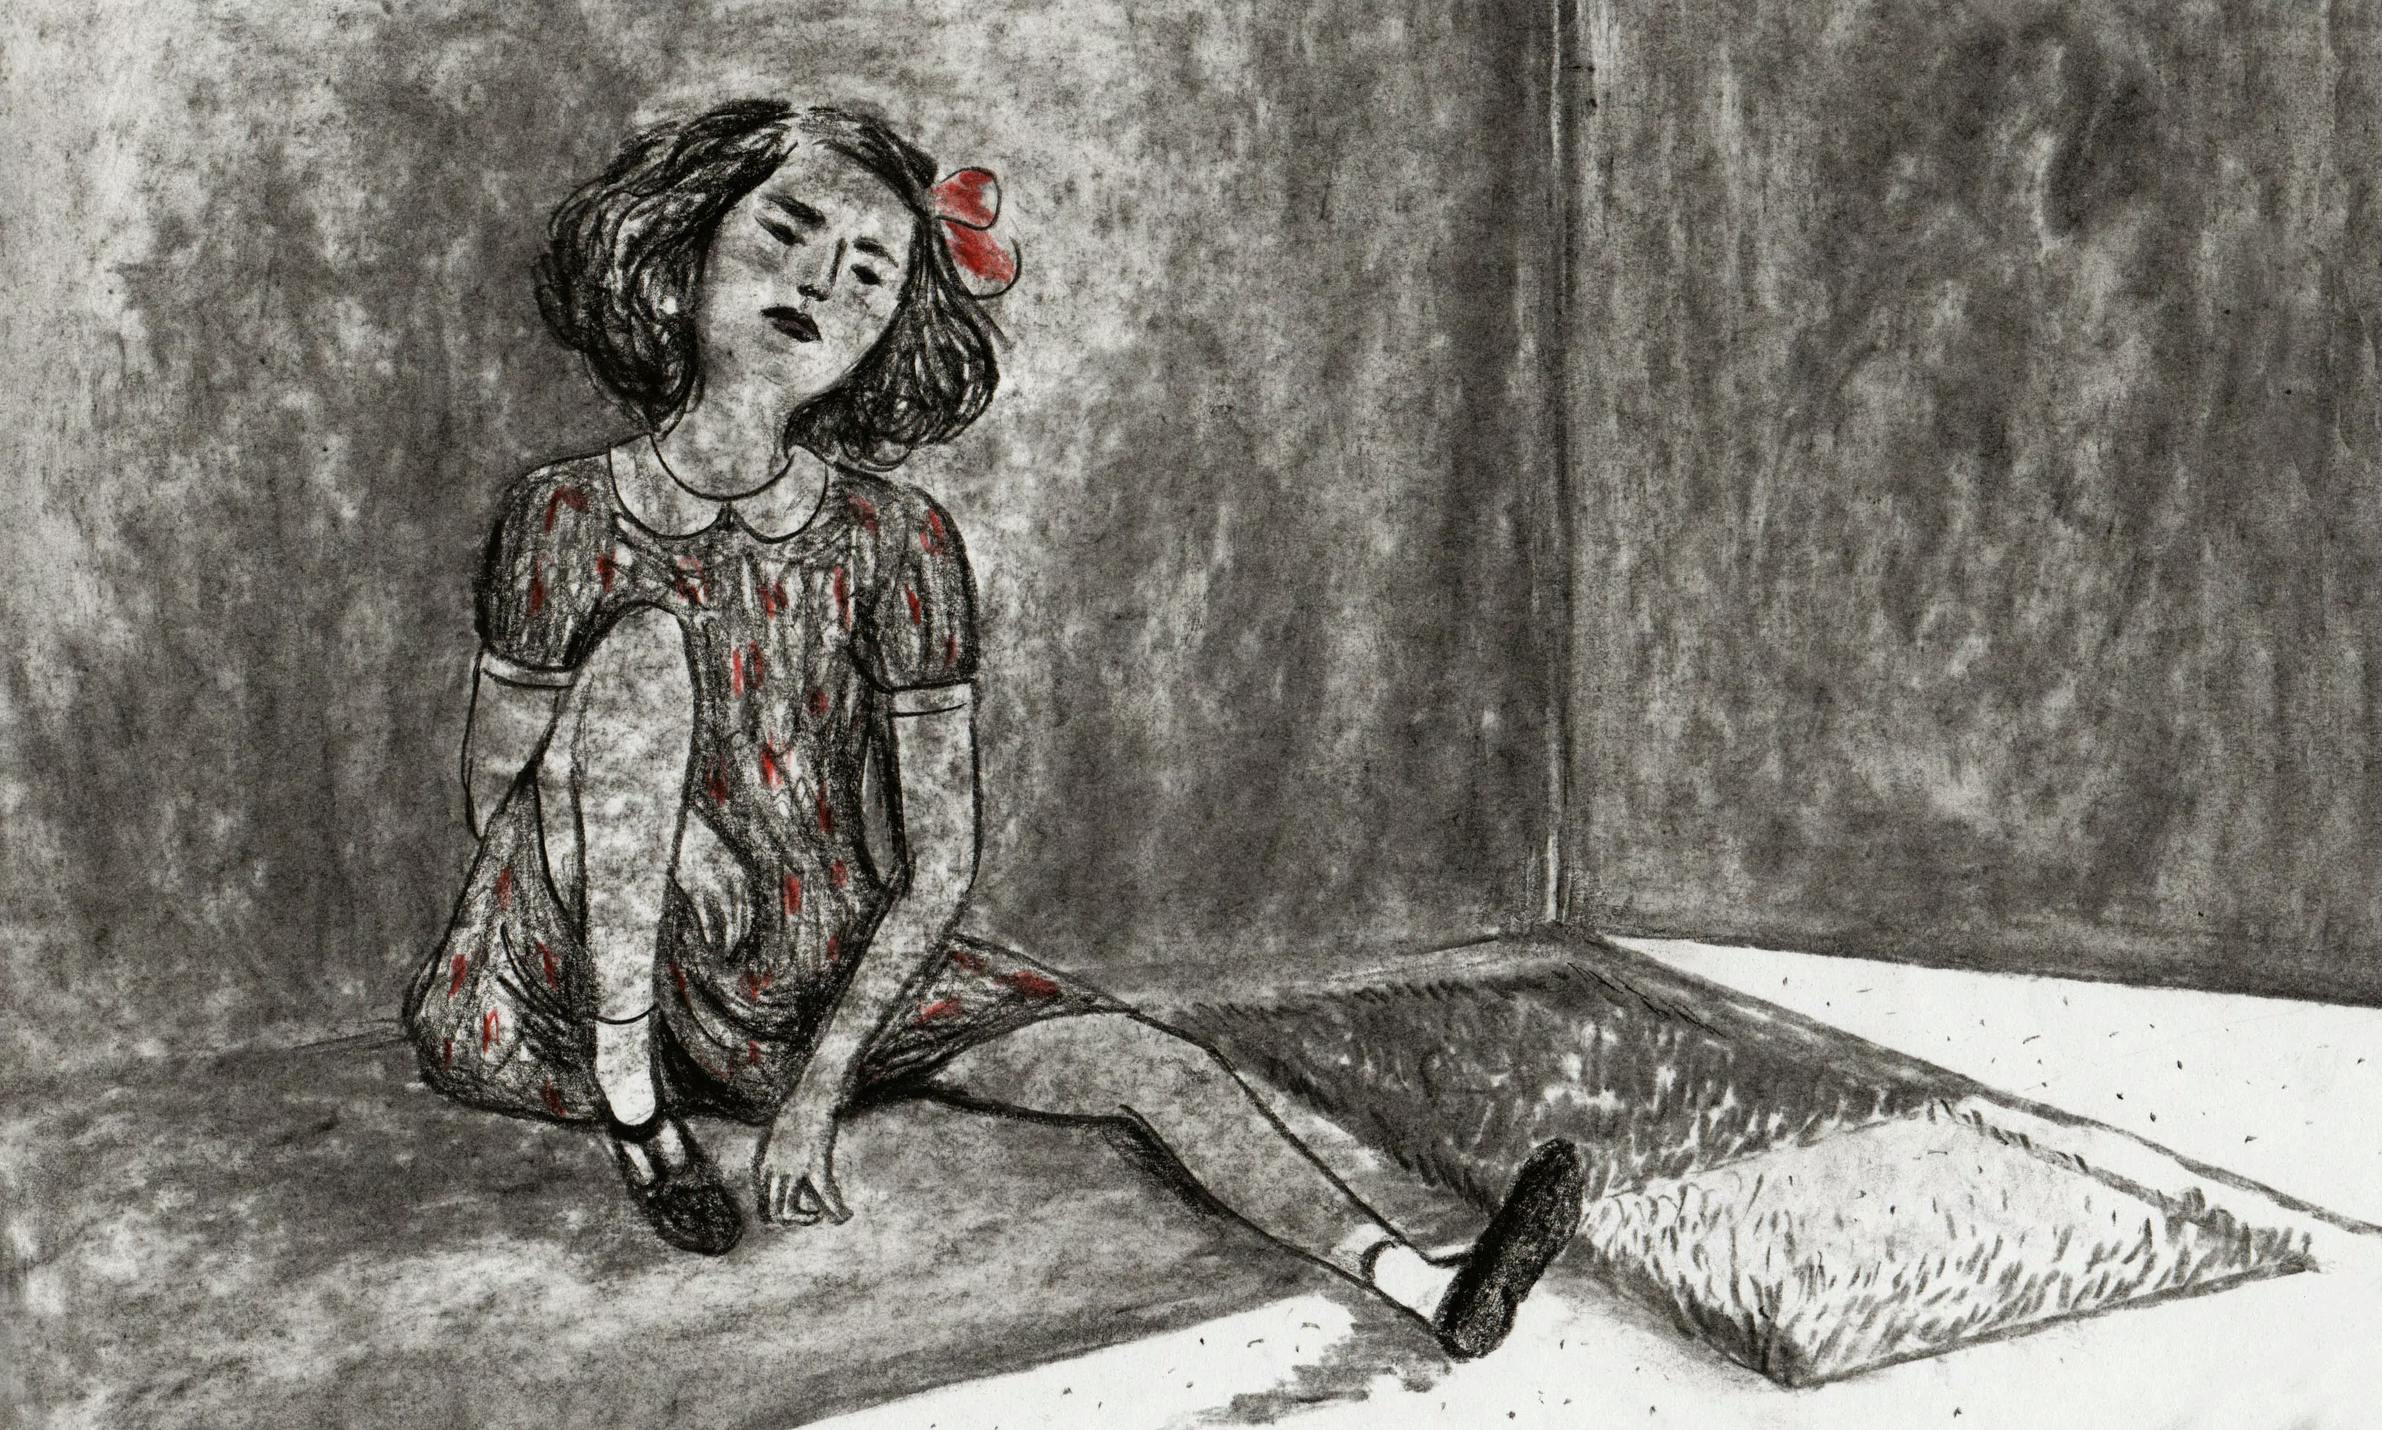 A young girl sits sulkily in a shadowy corner.